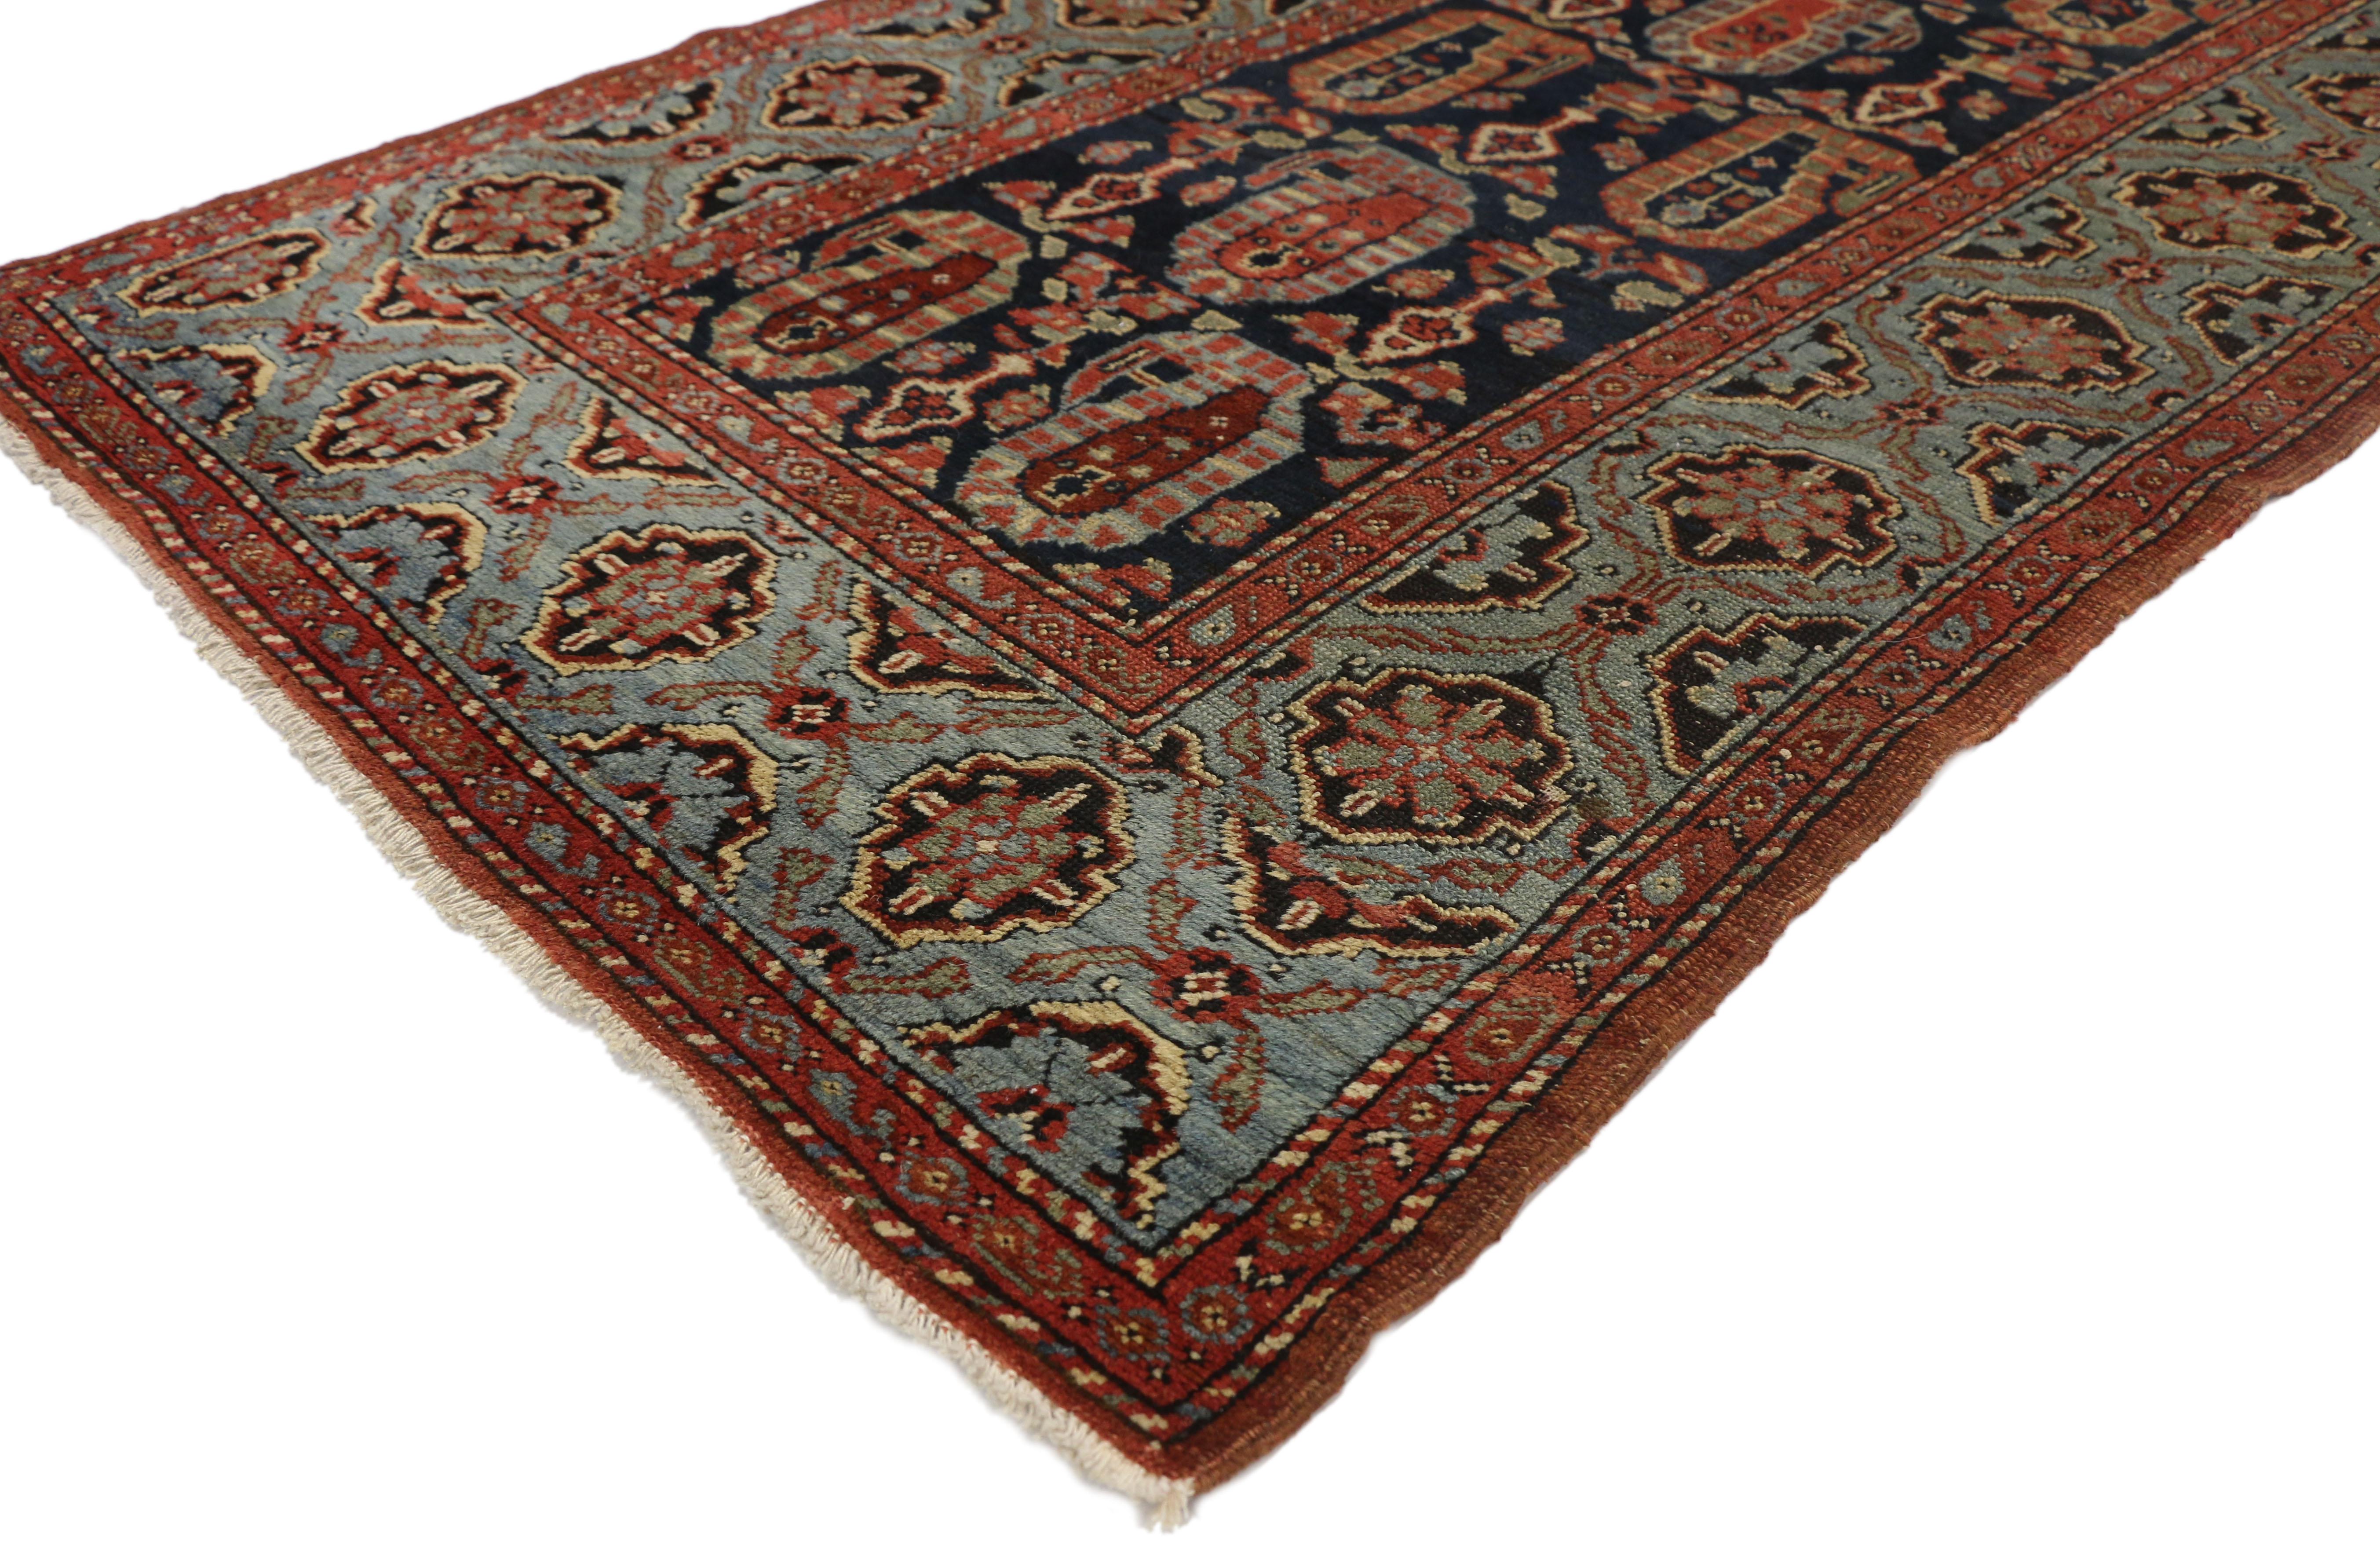 77304 Antique Persian Malayer Hallway Runner with Modern Parisian Style 03'05 x 13'06. Full of history with woven tales and a dark color palette, this hand knotted wool antique Persian Malayer runner would bring a sense of nostalgic charm to nearly